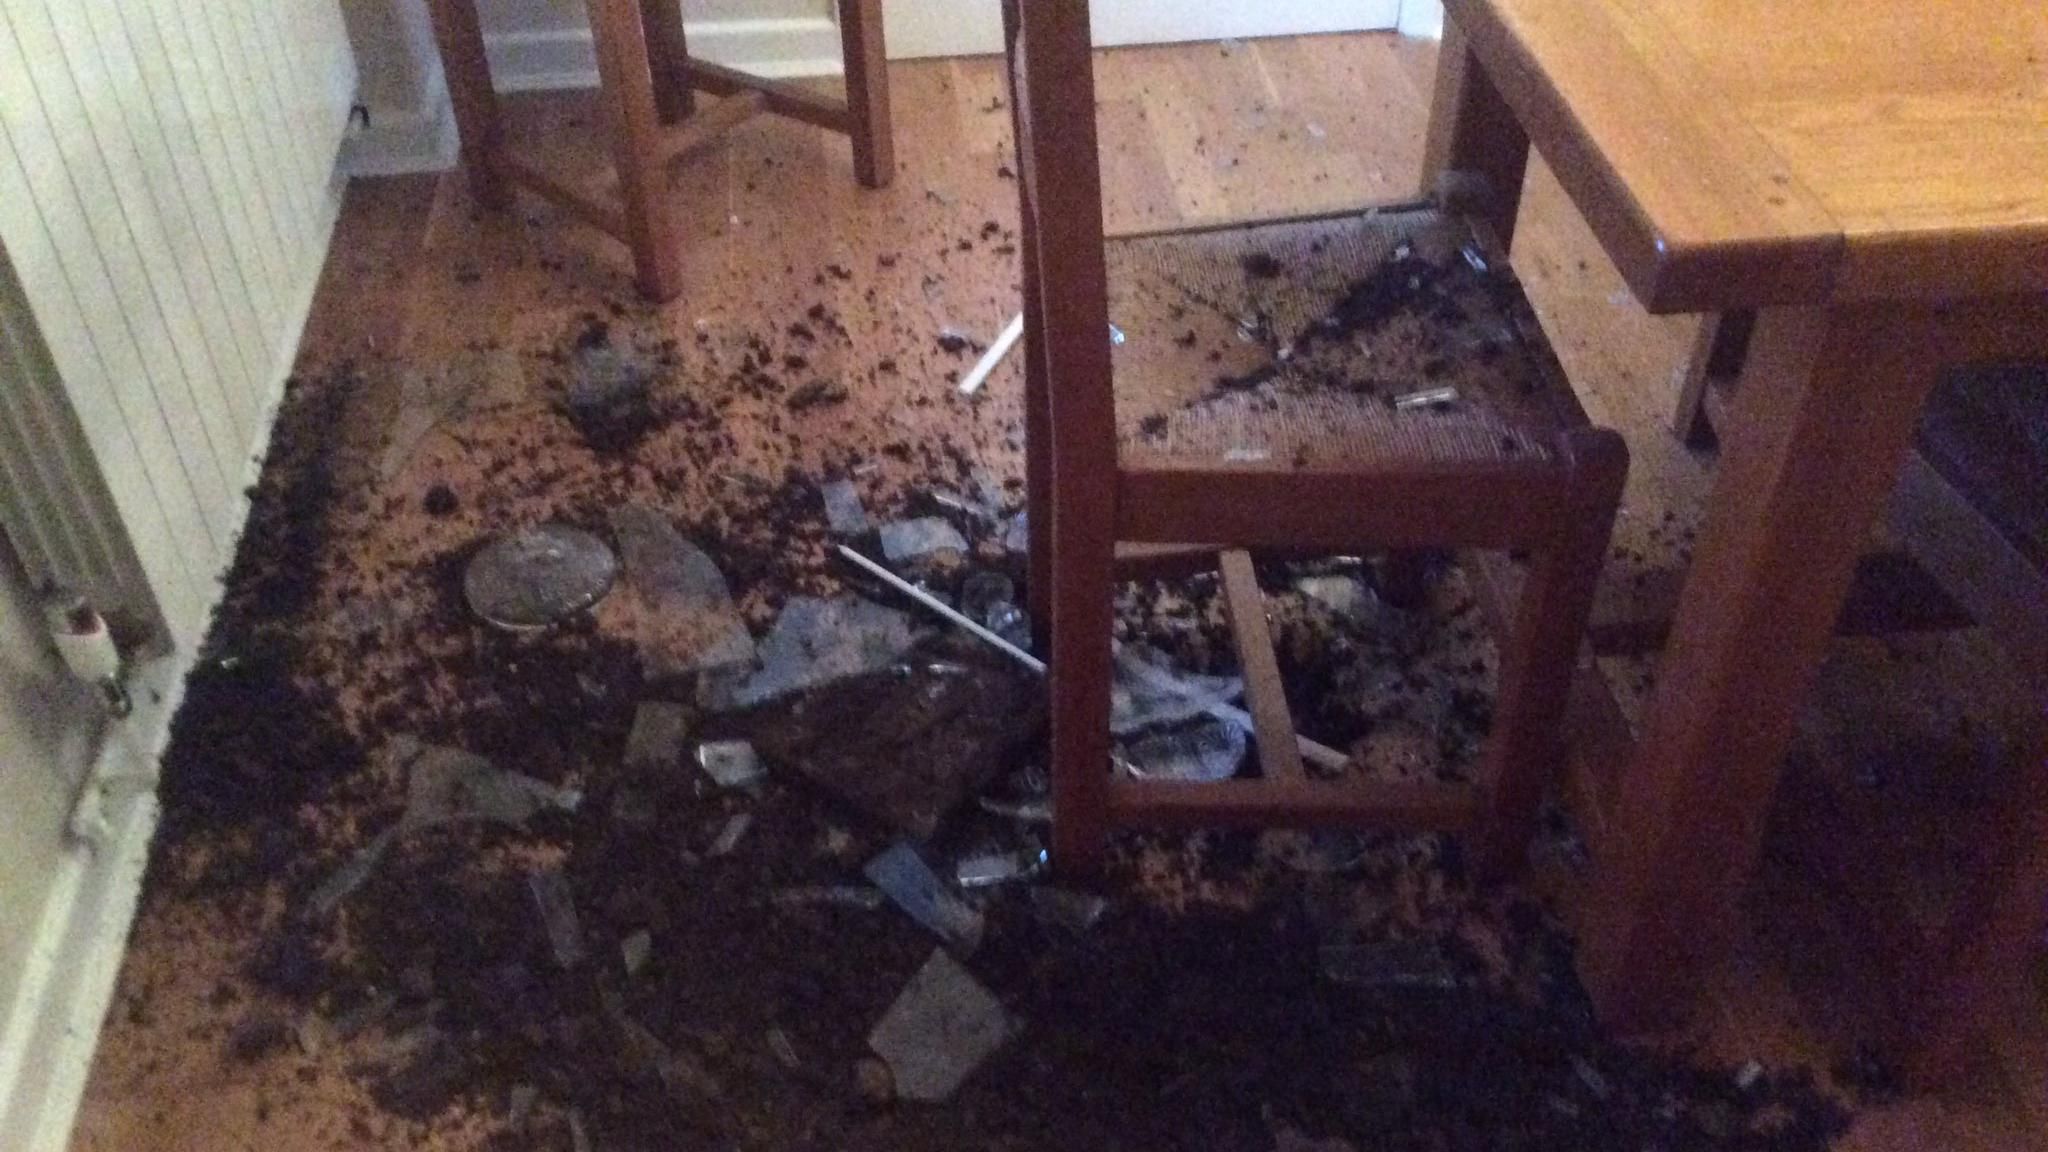 Damage inside house caused by the incident